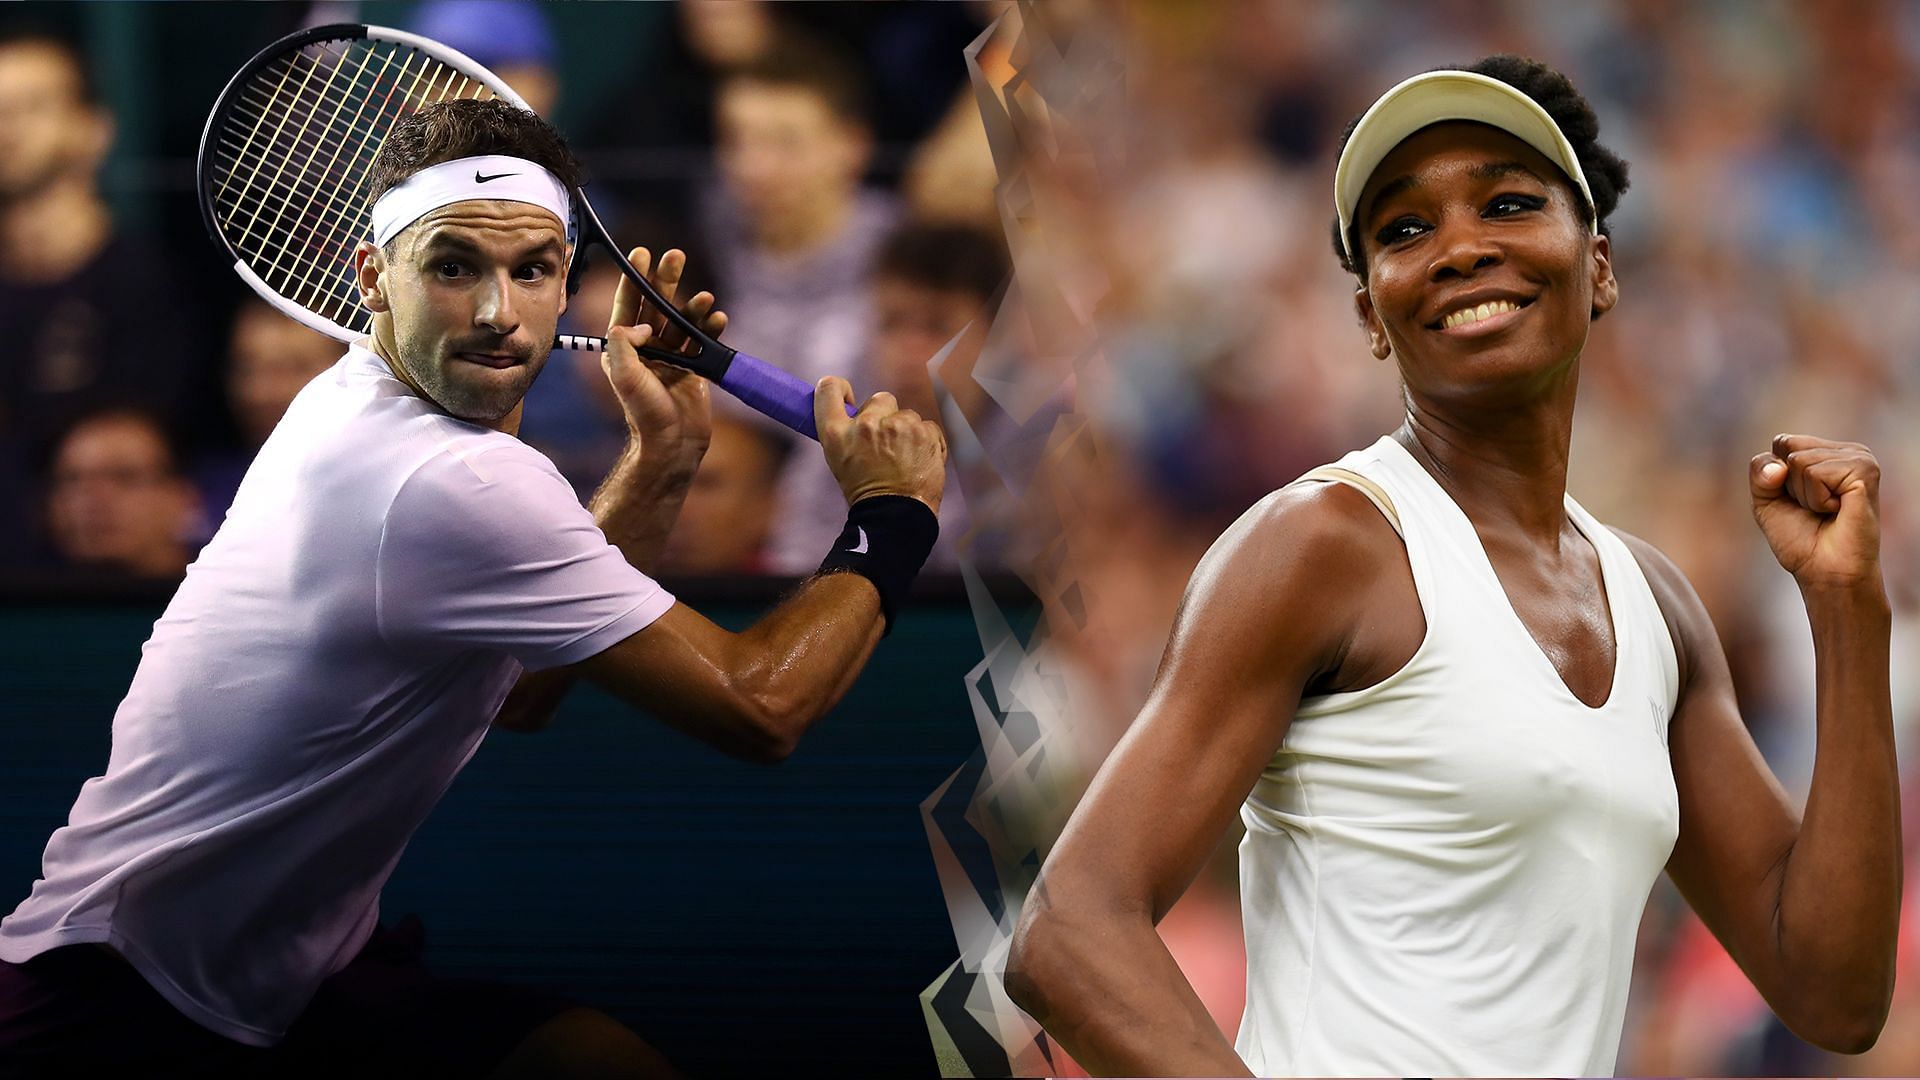 “We need to do another one of our online sessions” - Grigor Dimitrov responds to Venus Williams playfully calling him 'hottest' on tour